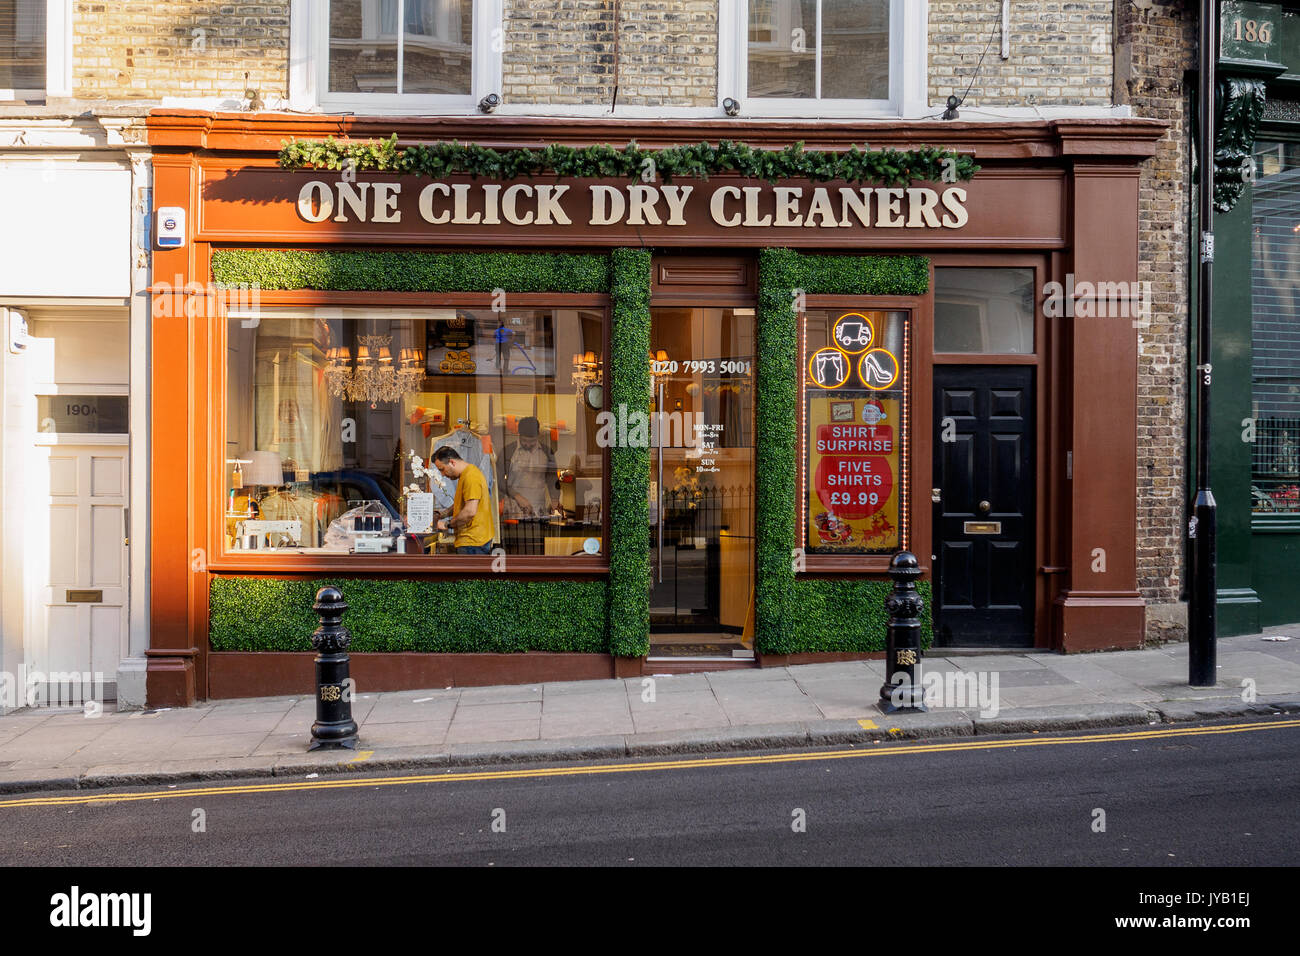 High Street Dry Cleaner in London. 2017. Querformat. Stockfoto